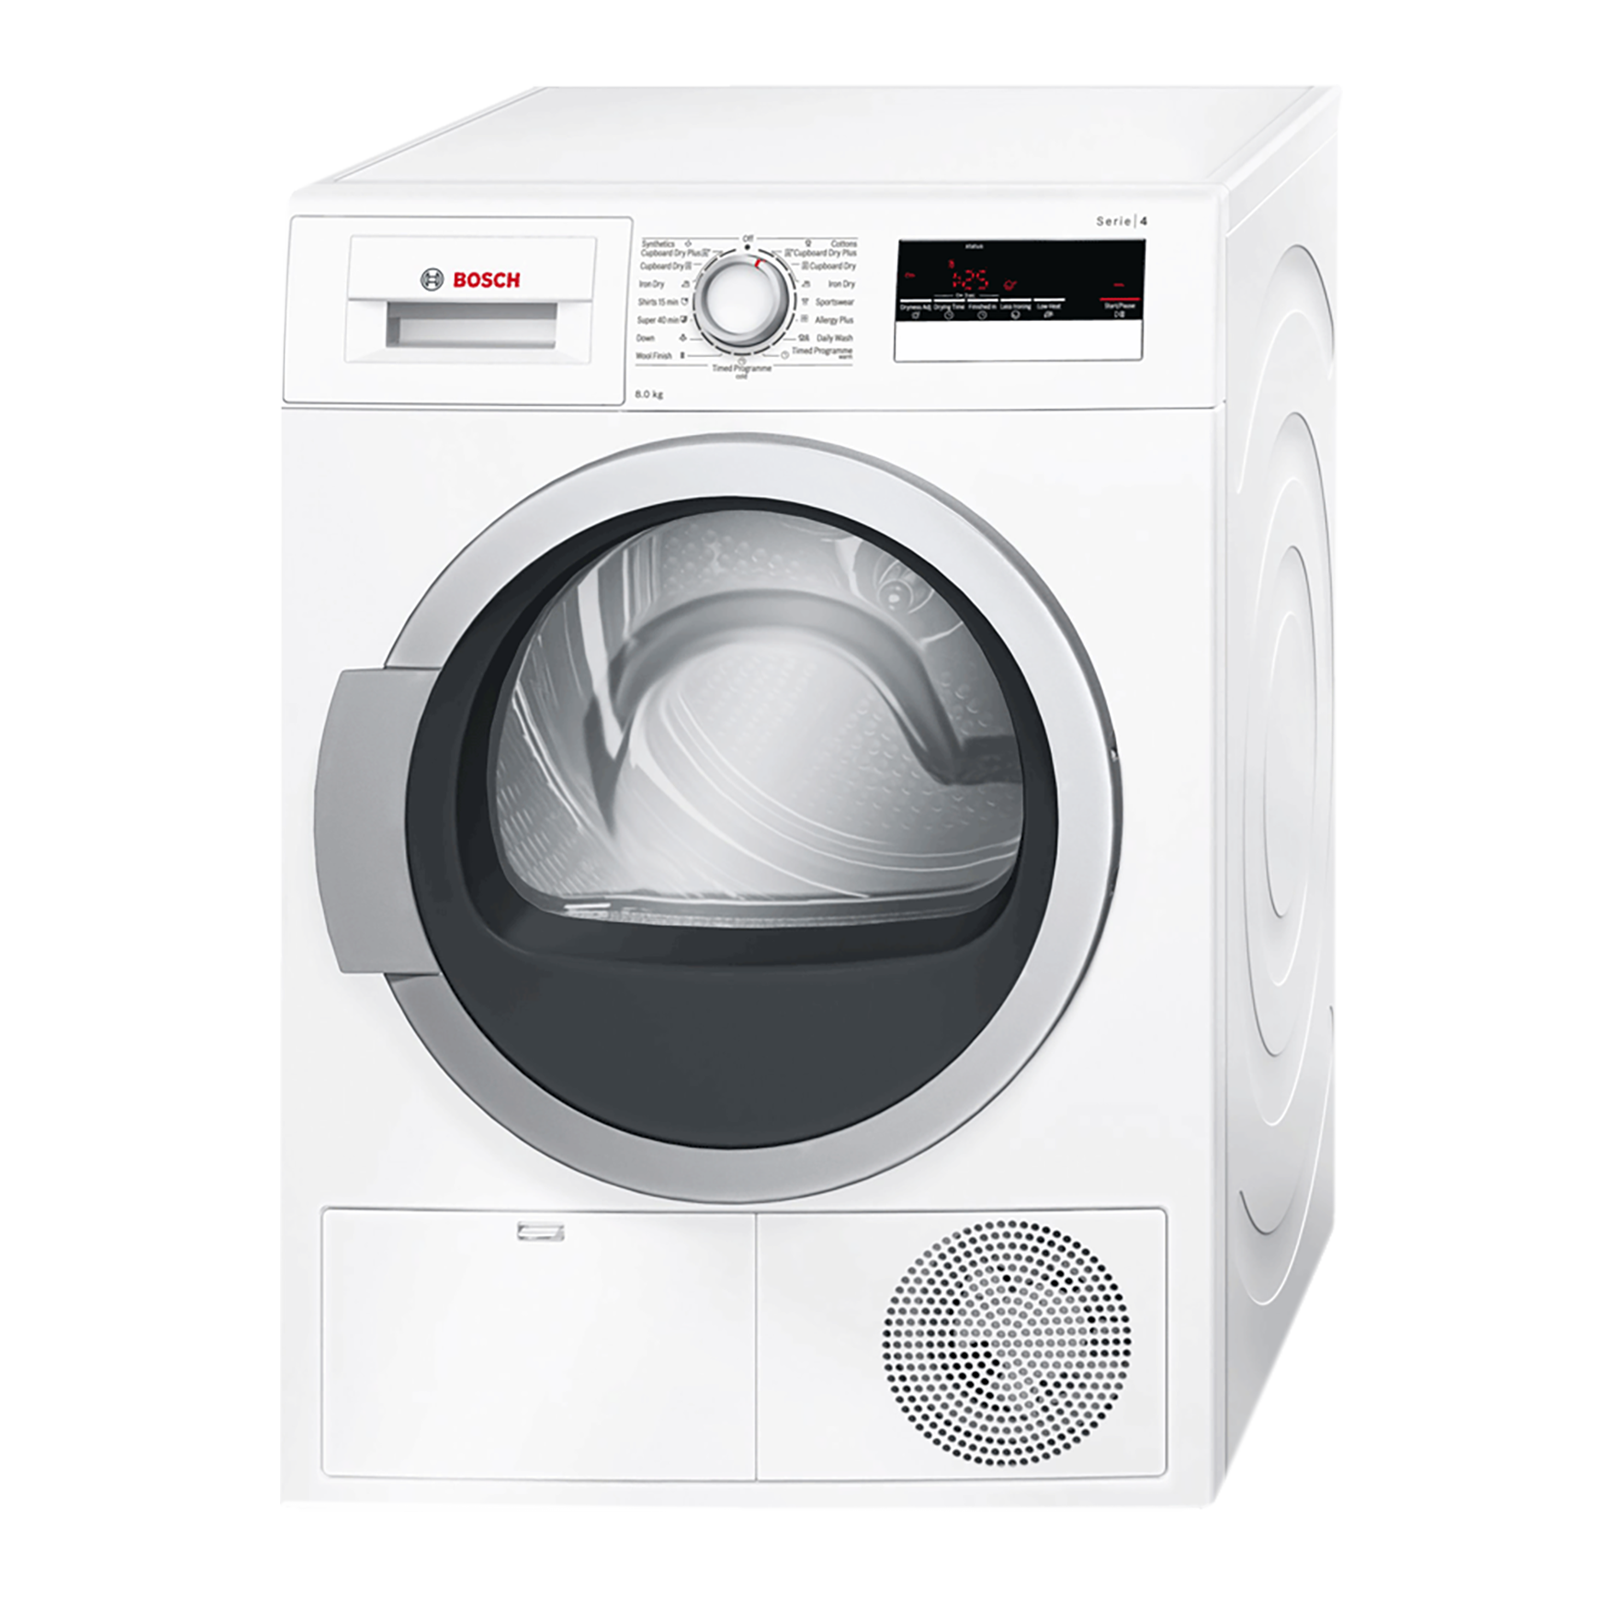 Bosch 8 kg Fully Automatic Front Load Dryer (Series 4, WTB86202IN, In-Built Heater, White)_1